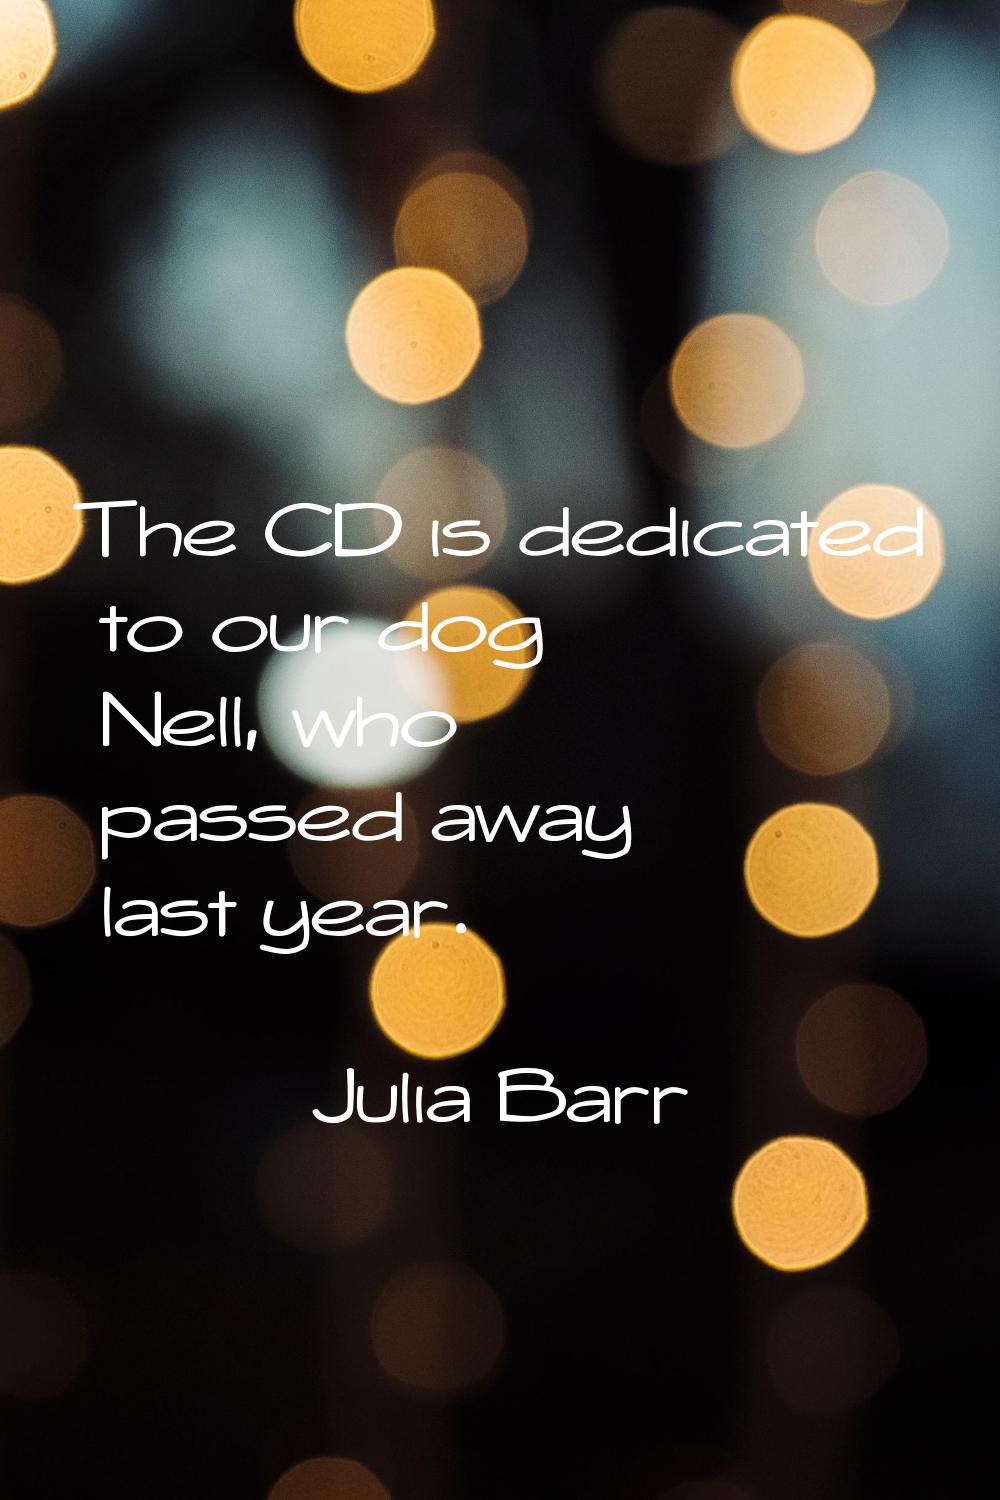 The CD is dedicated to our dog Nell, who passed away last year.